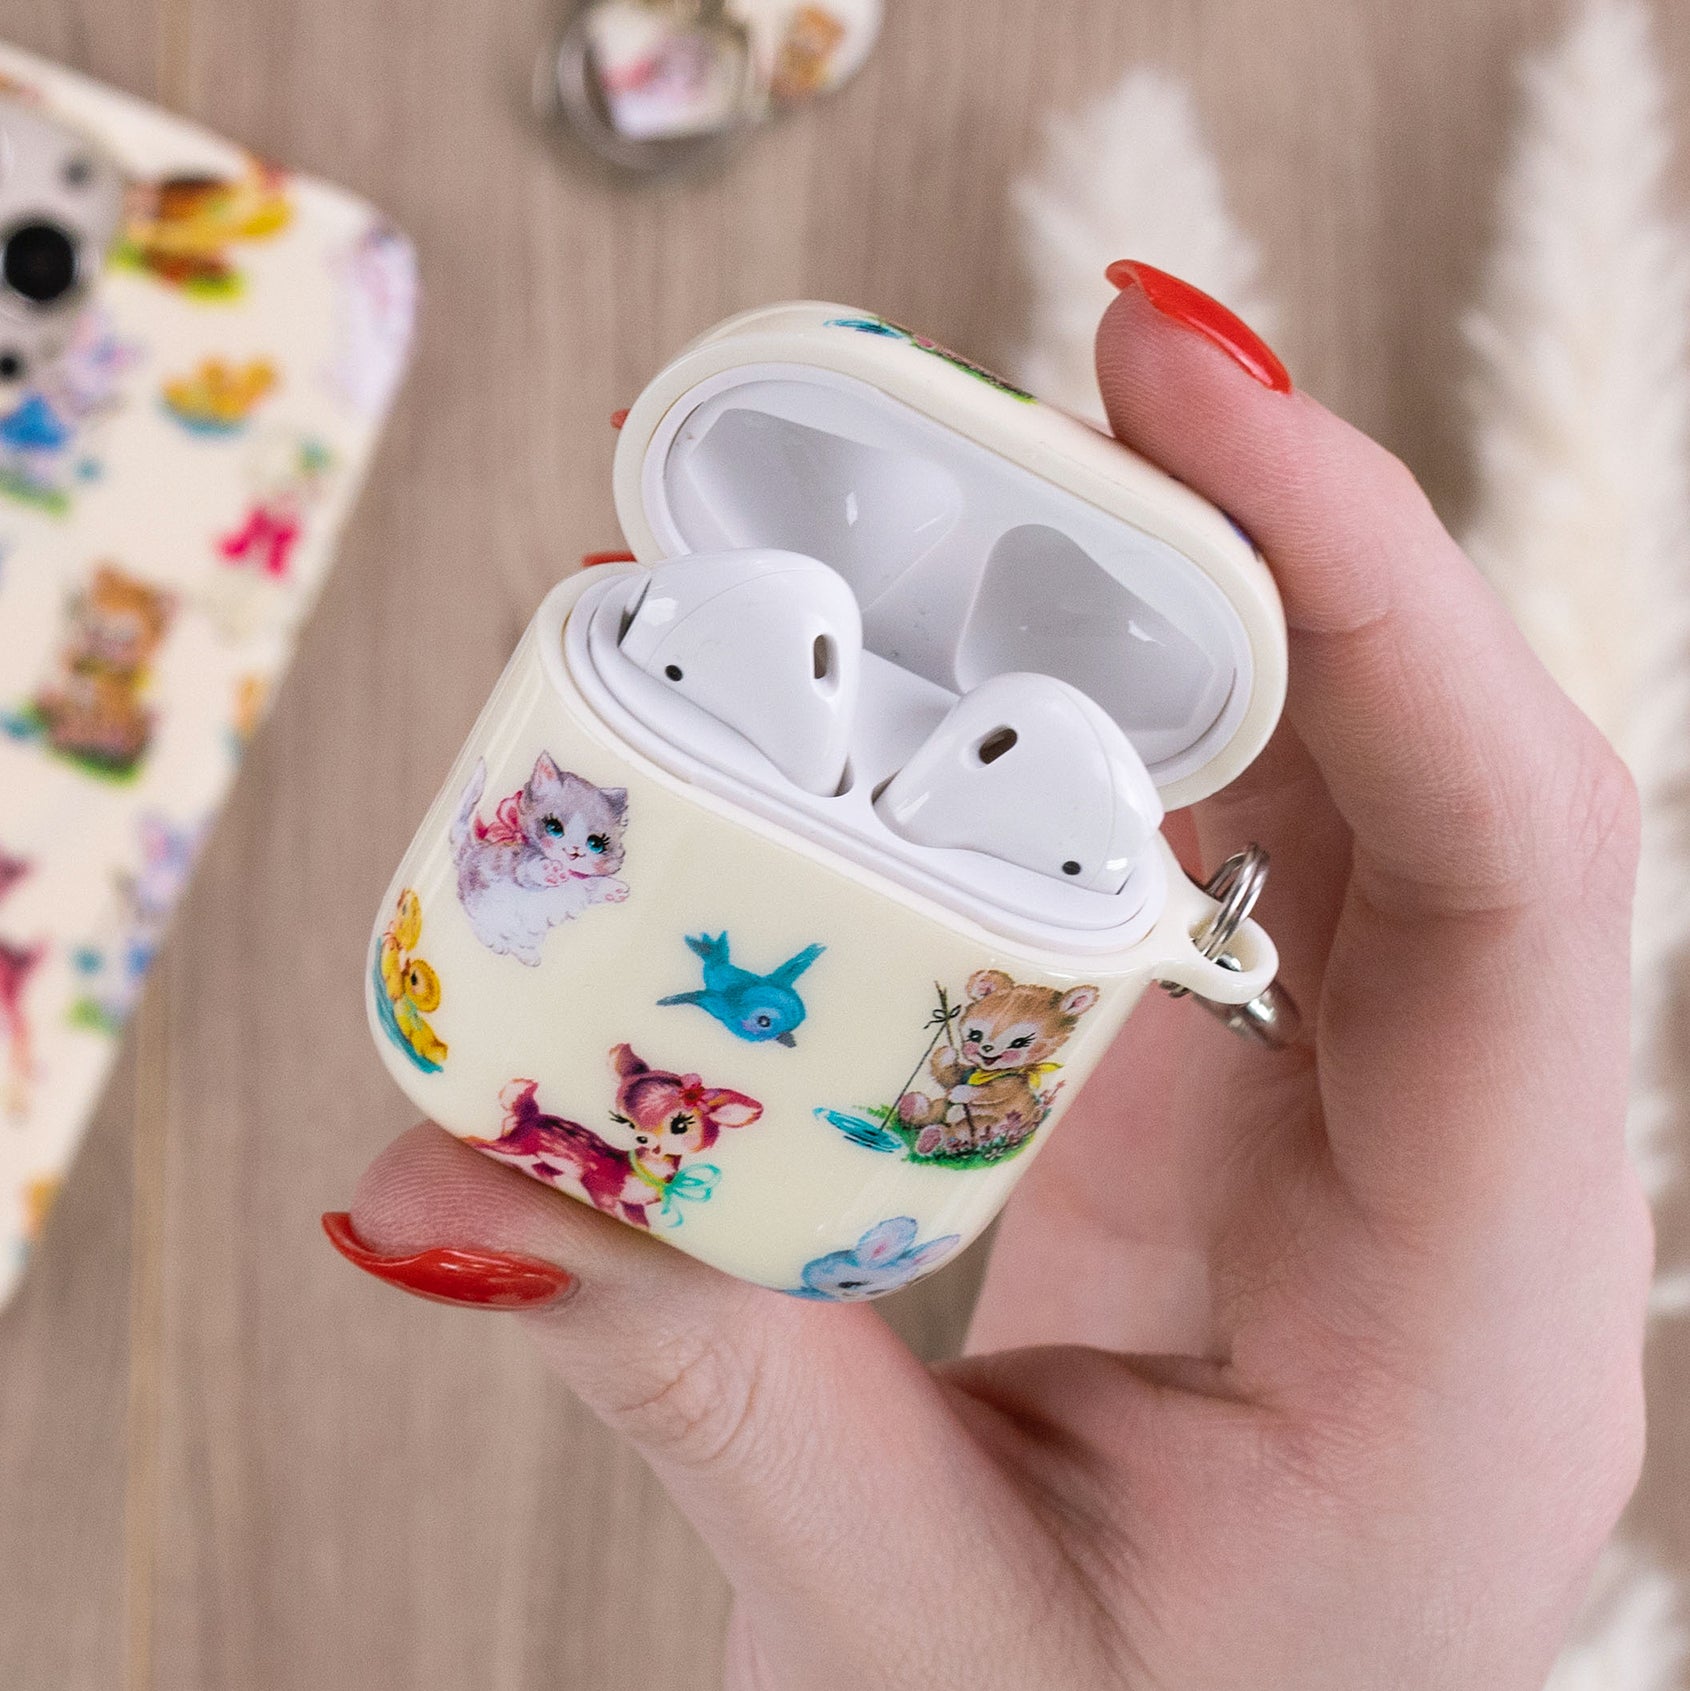 Louis Vuitton Has Animal-Themed Earpods Cases That Are Super Cute